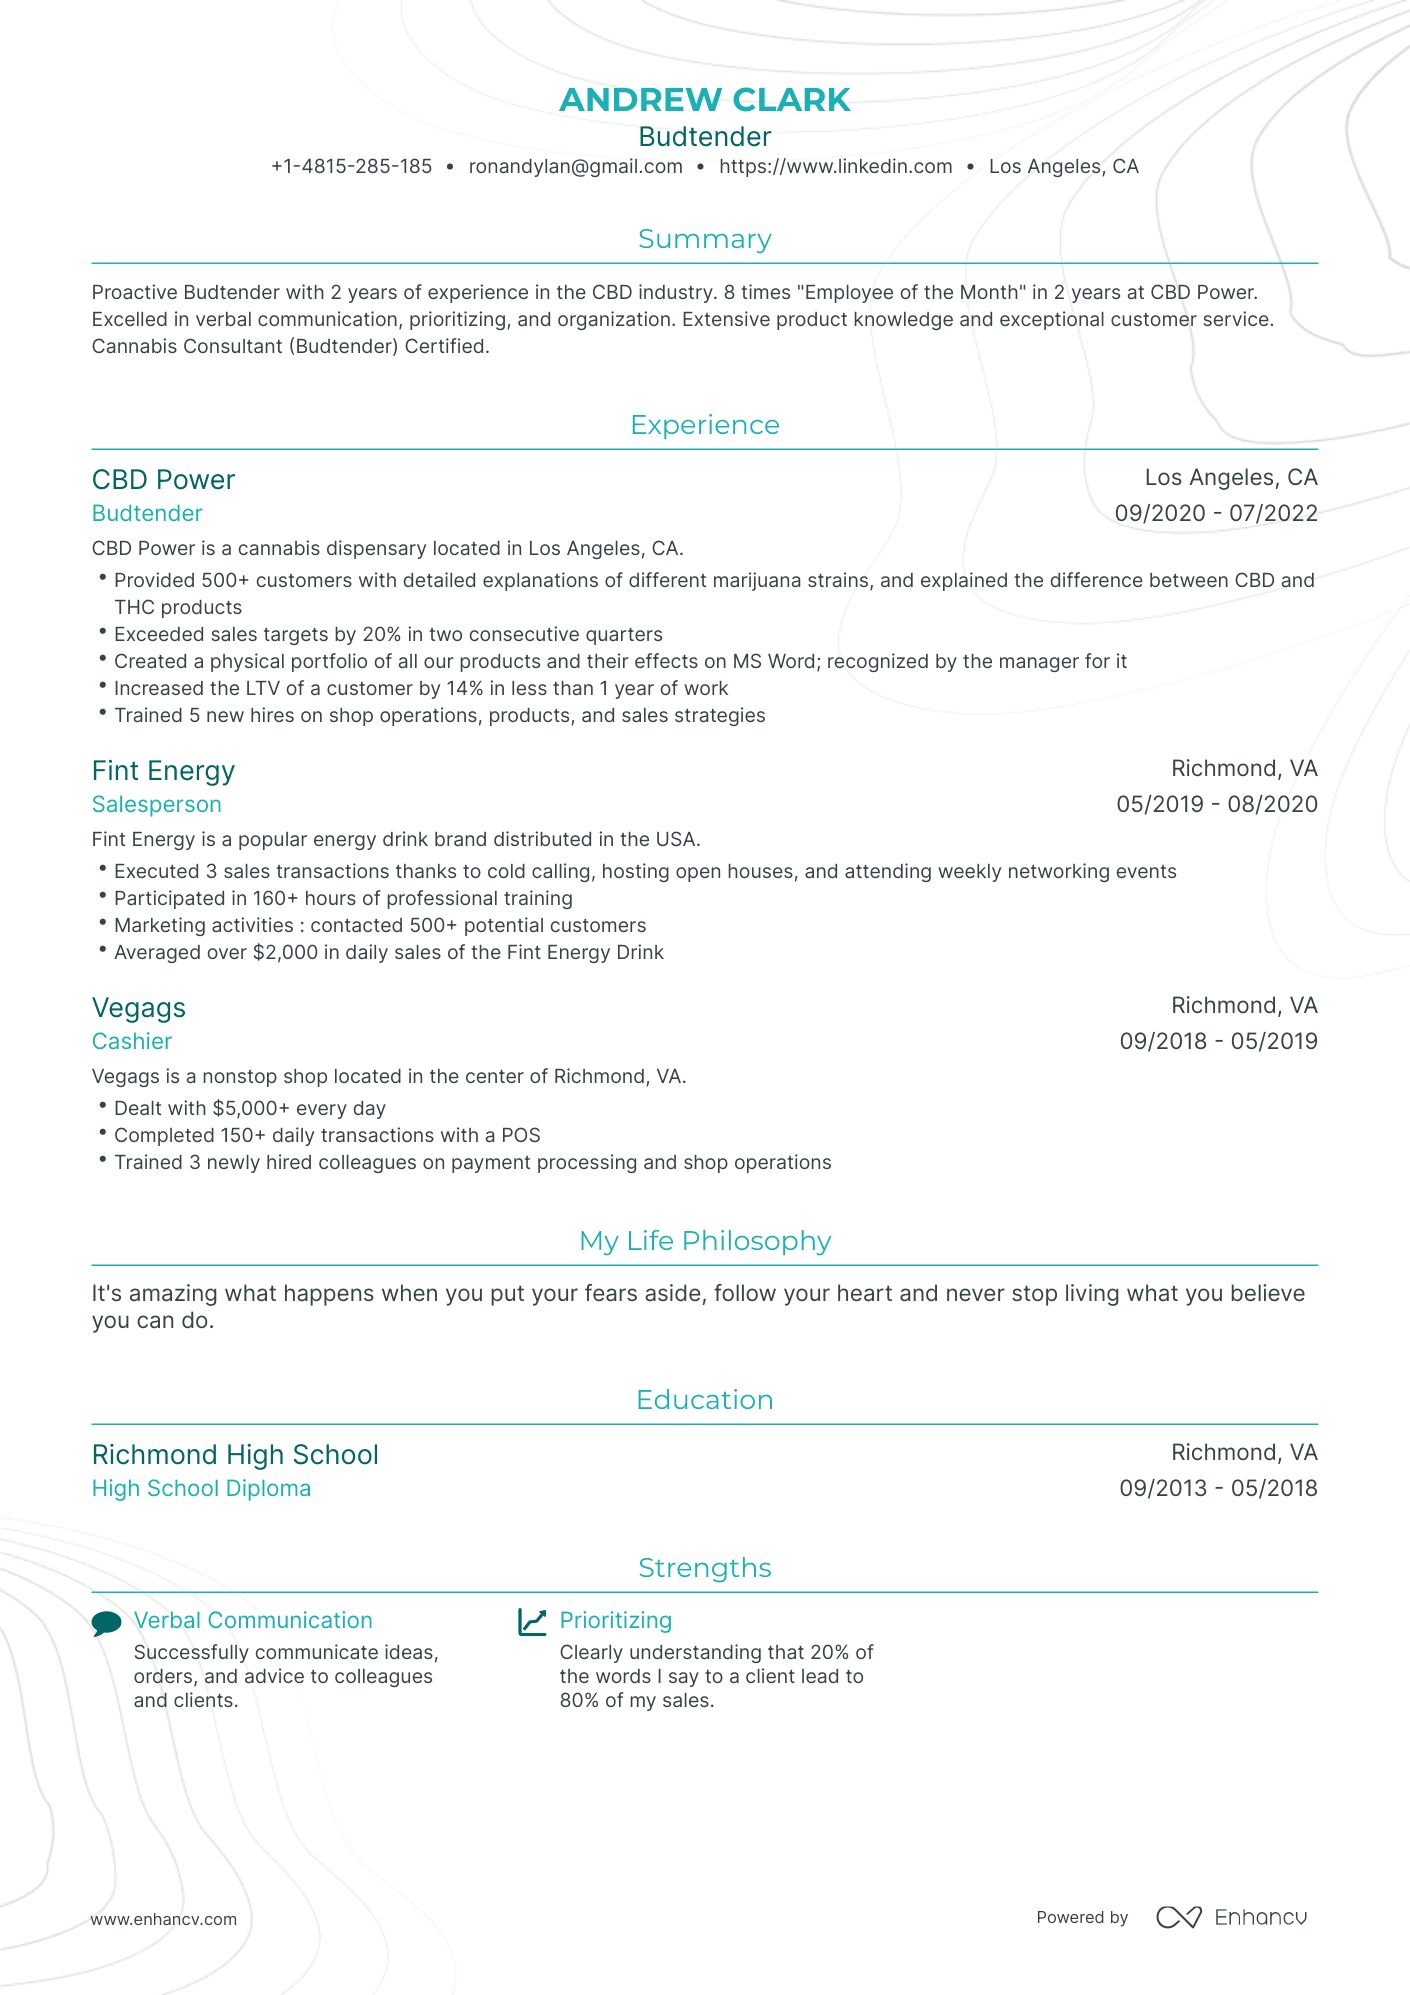 Traditional Budtender Resume Template